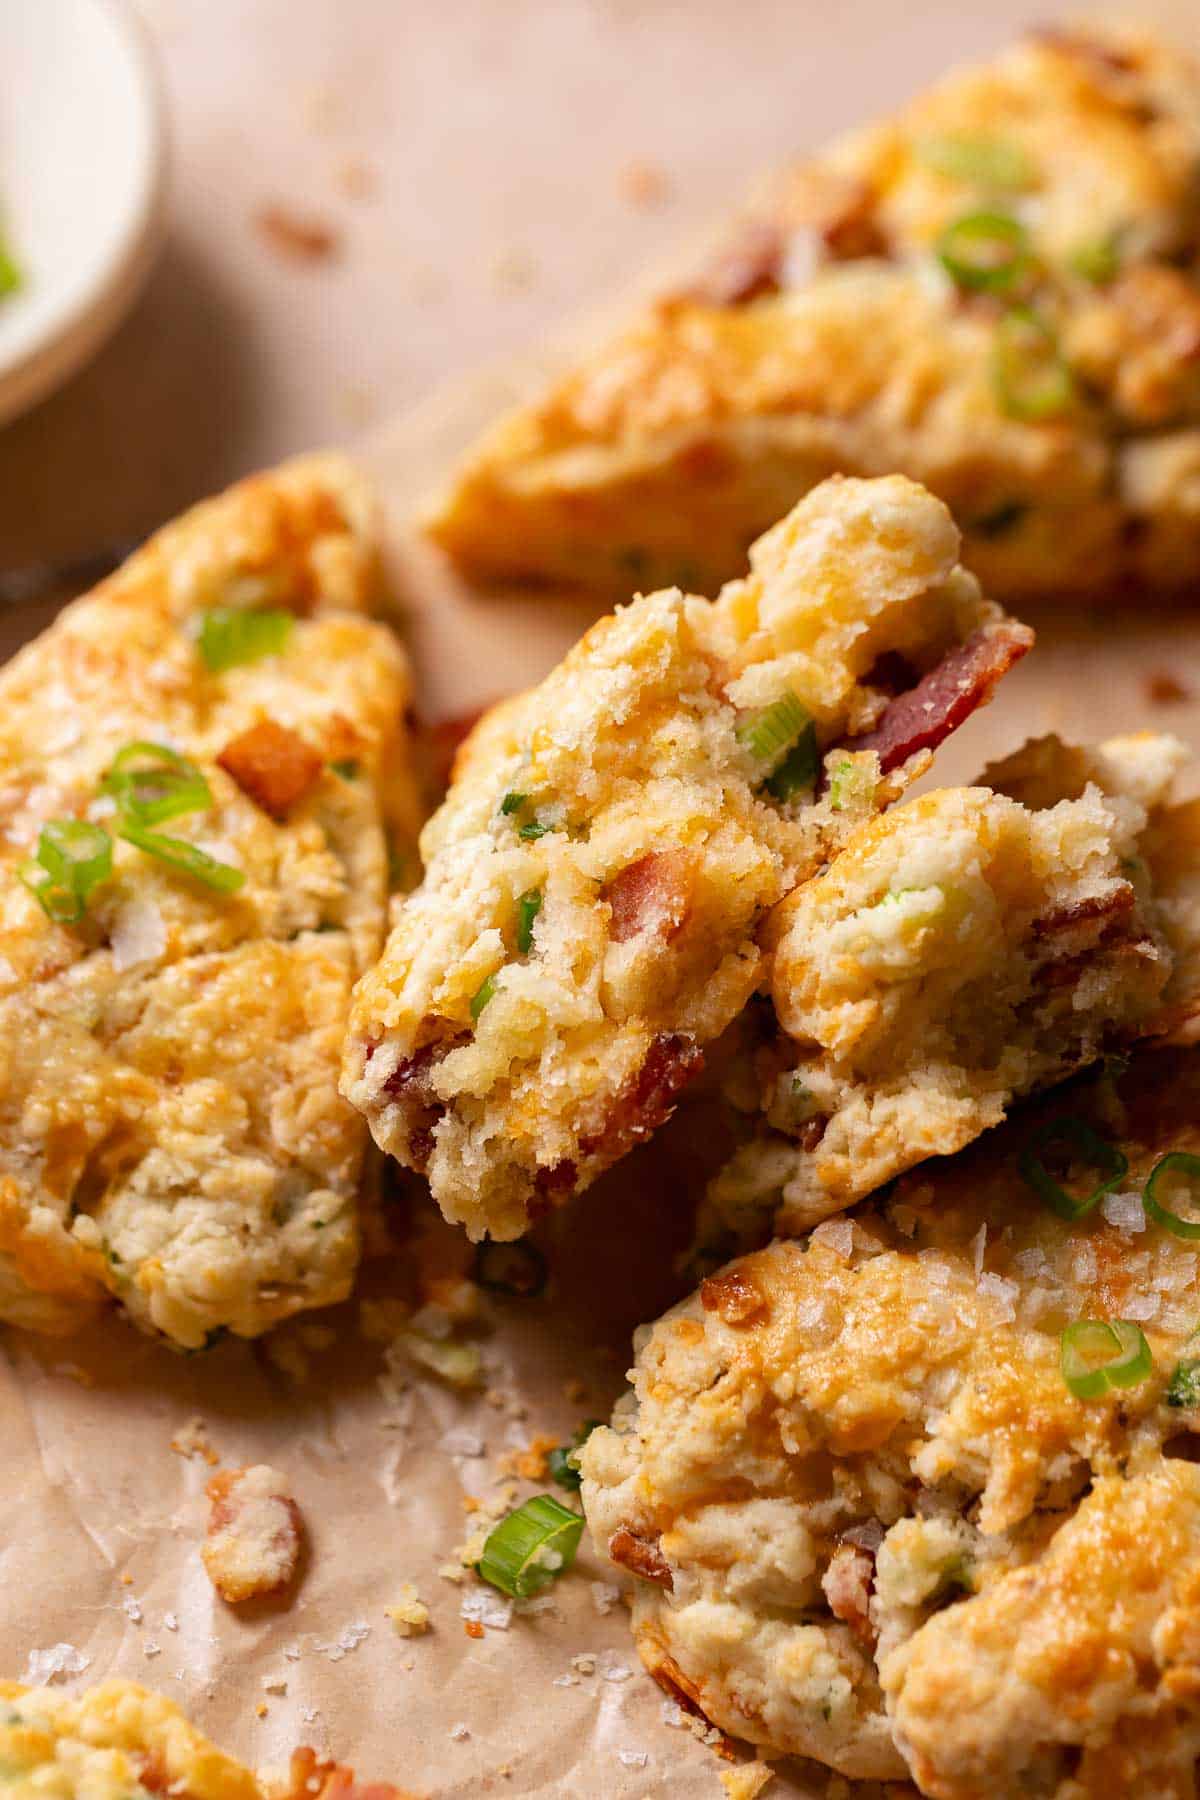 Bacon cheddar scones broken in half to show the soft and tender texture.